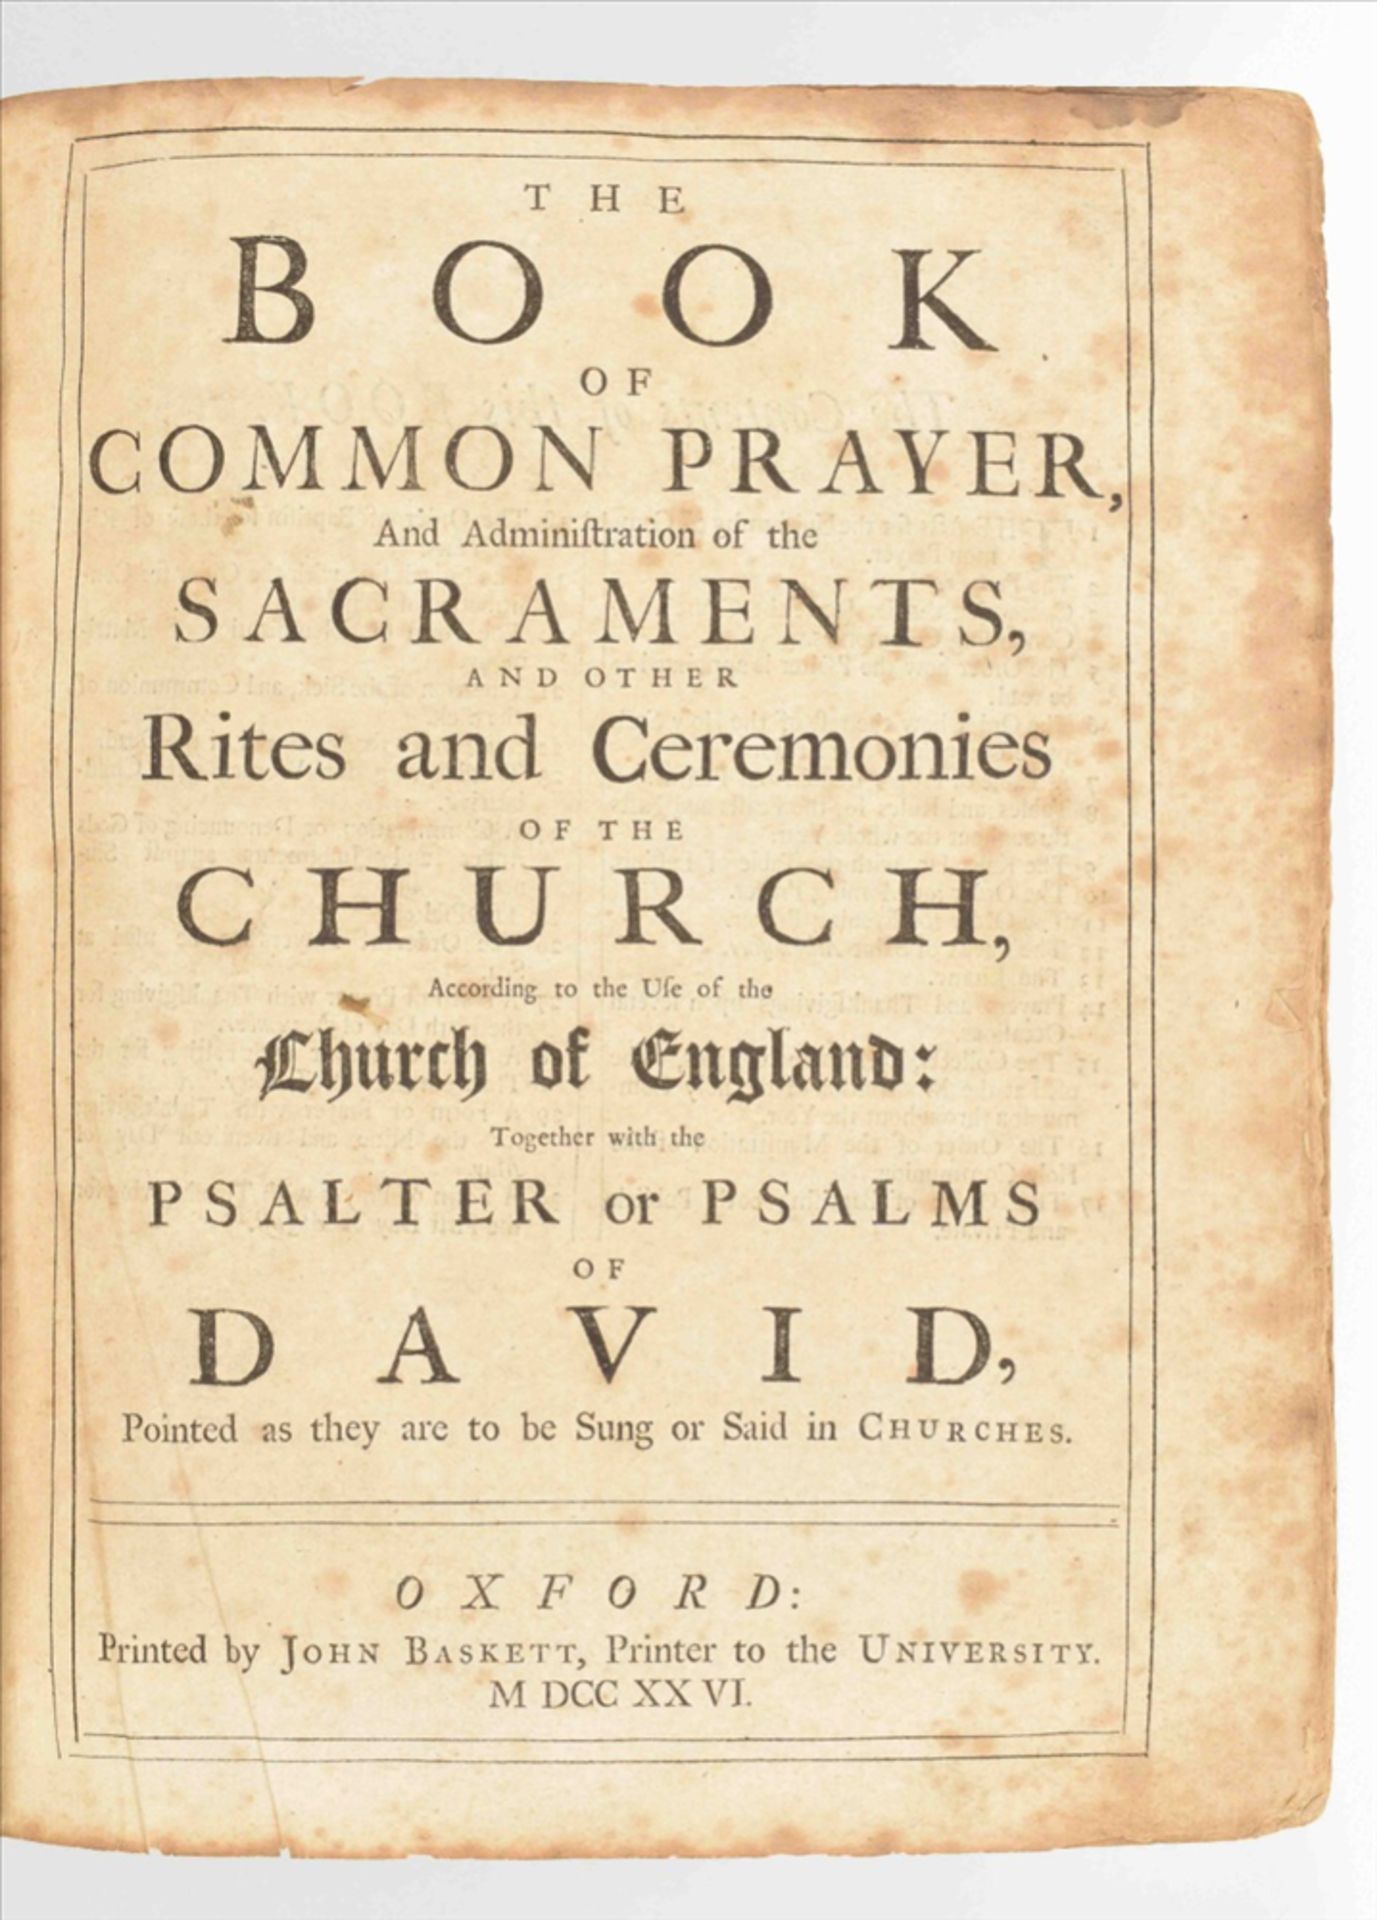 [Bible] The Book of Common Prayer and the English Bible with maps and engravings - Image 4 of 10